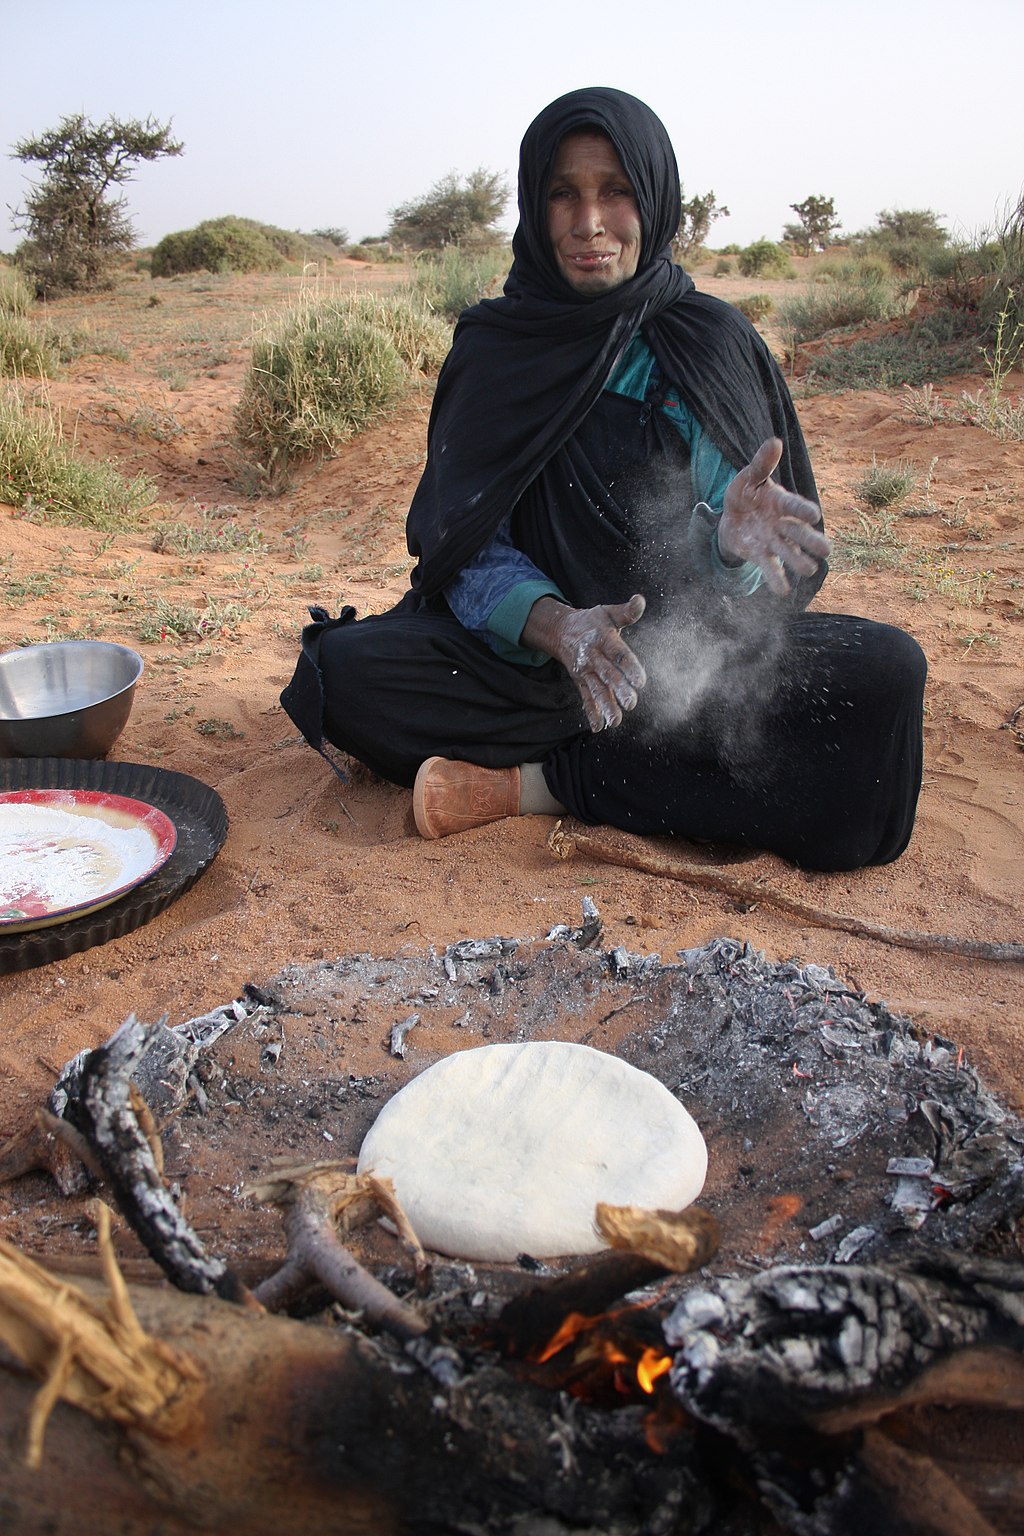 “Saharawi during the daily ritual of preparing the bread; the dough is baked under the desert sand”, fotografiert von Laura Dauden. Lizenz: CC BY-SA 4.0.